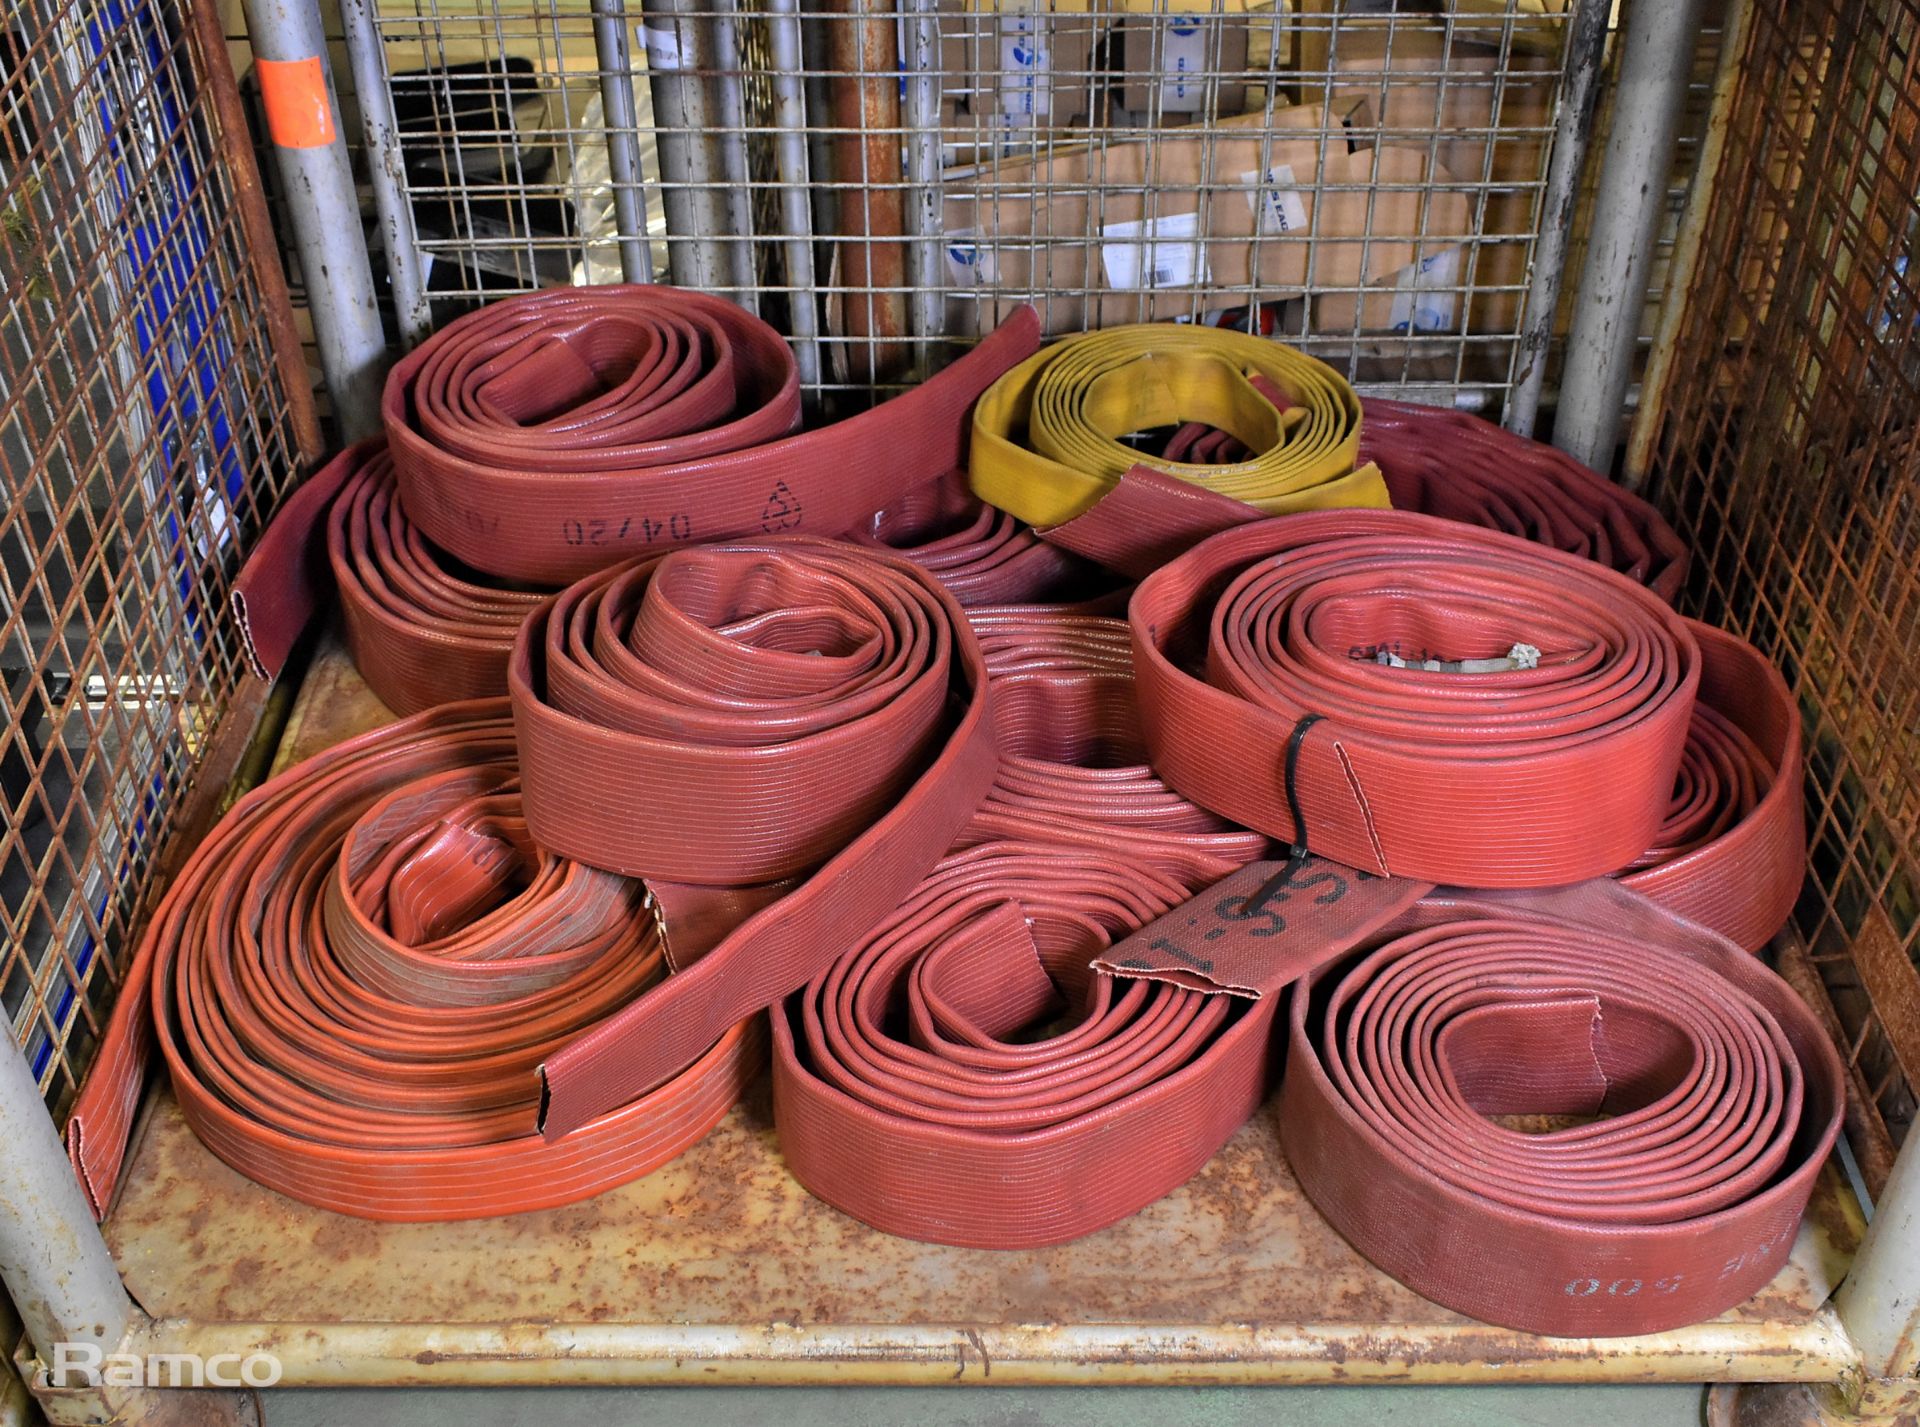 12x red layflat fire hoses - mixed sizes - some missing couplings